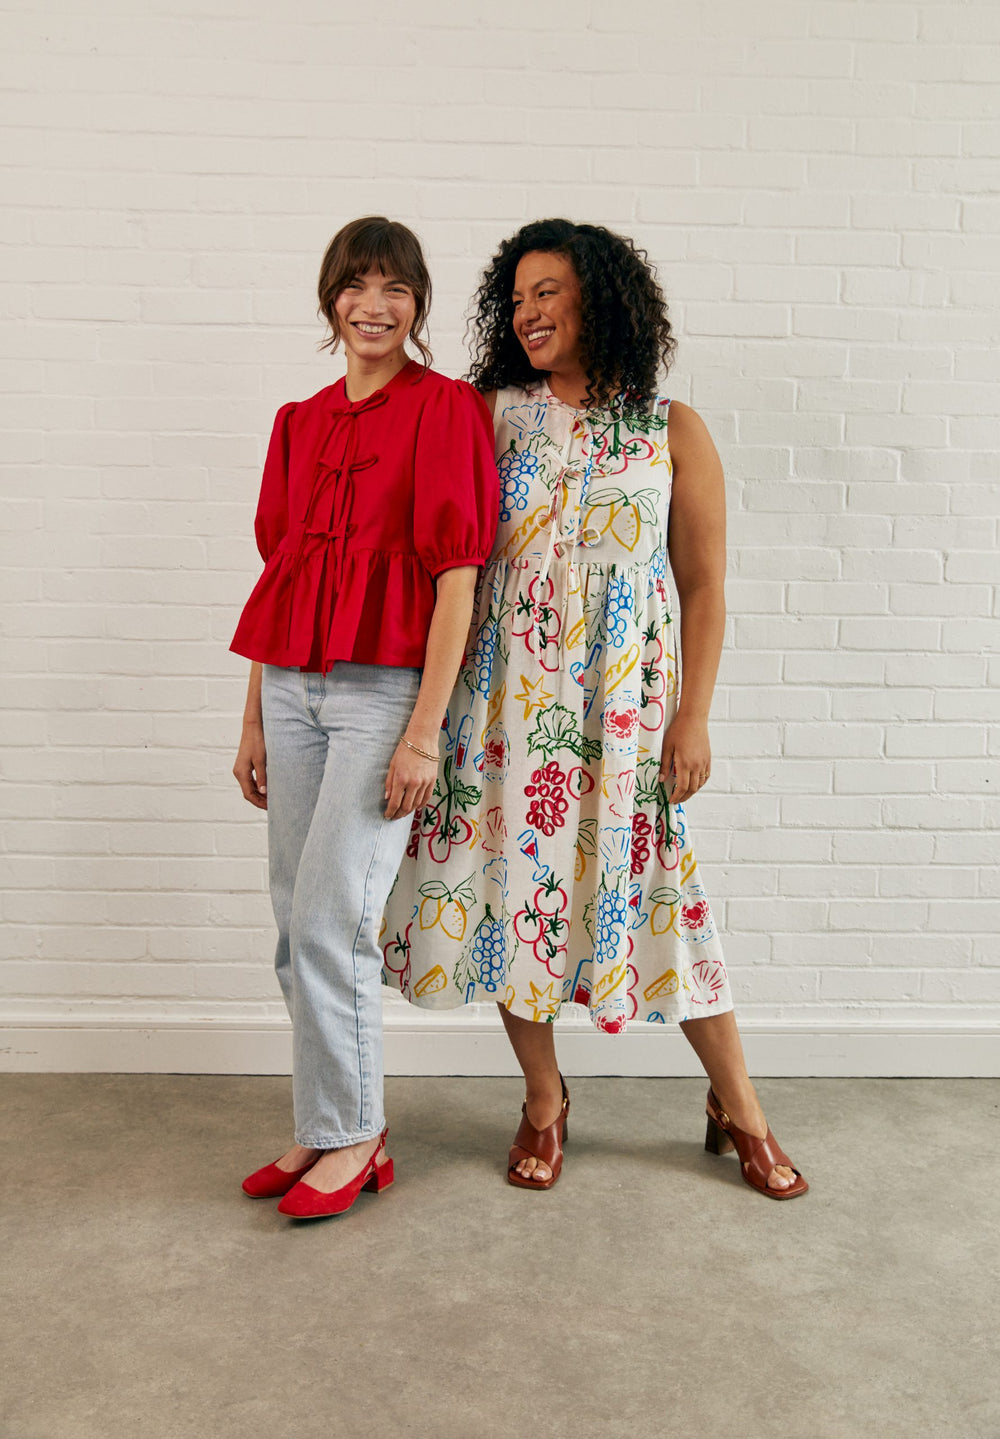 Women wearing the Fleur Dress and Blouse sewing pattern from Fabric Godmother on The Fold Line. A pattern made in cotton, linen, denim, brocade or corduroy fabric, with optional sleeves, ties at the front, and a gathered peplum or skirt.